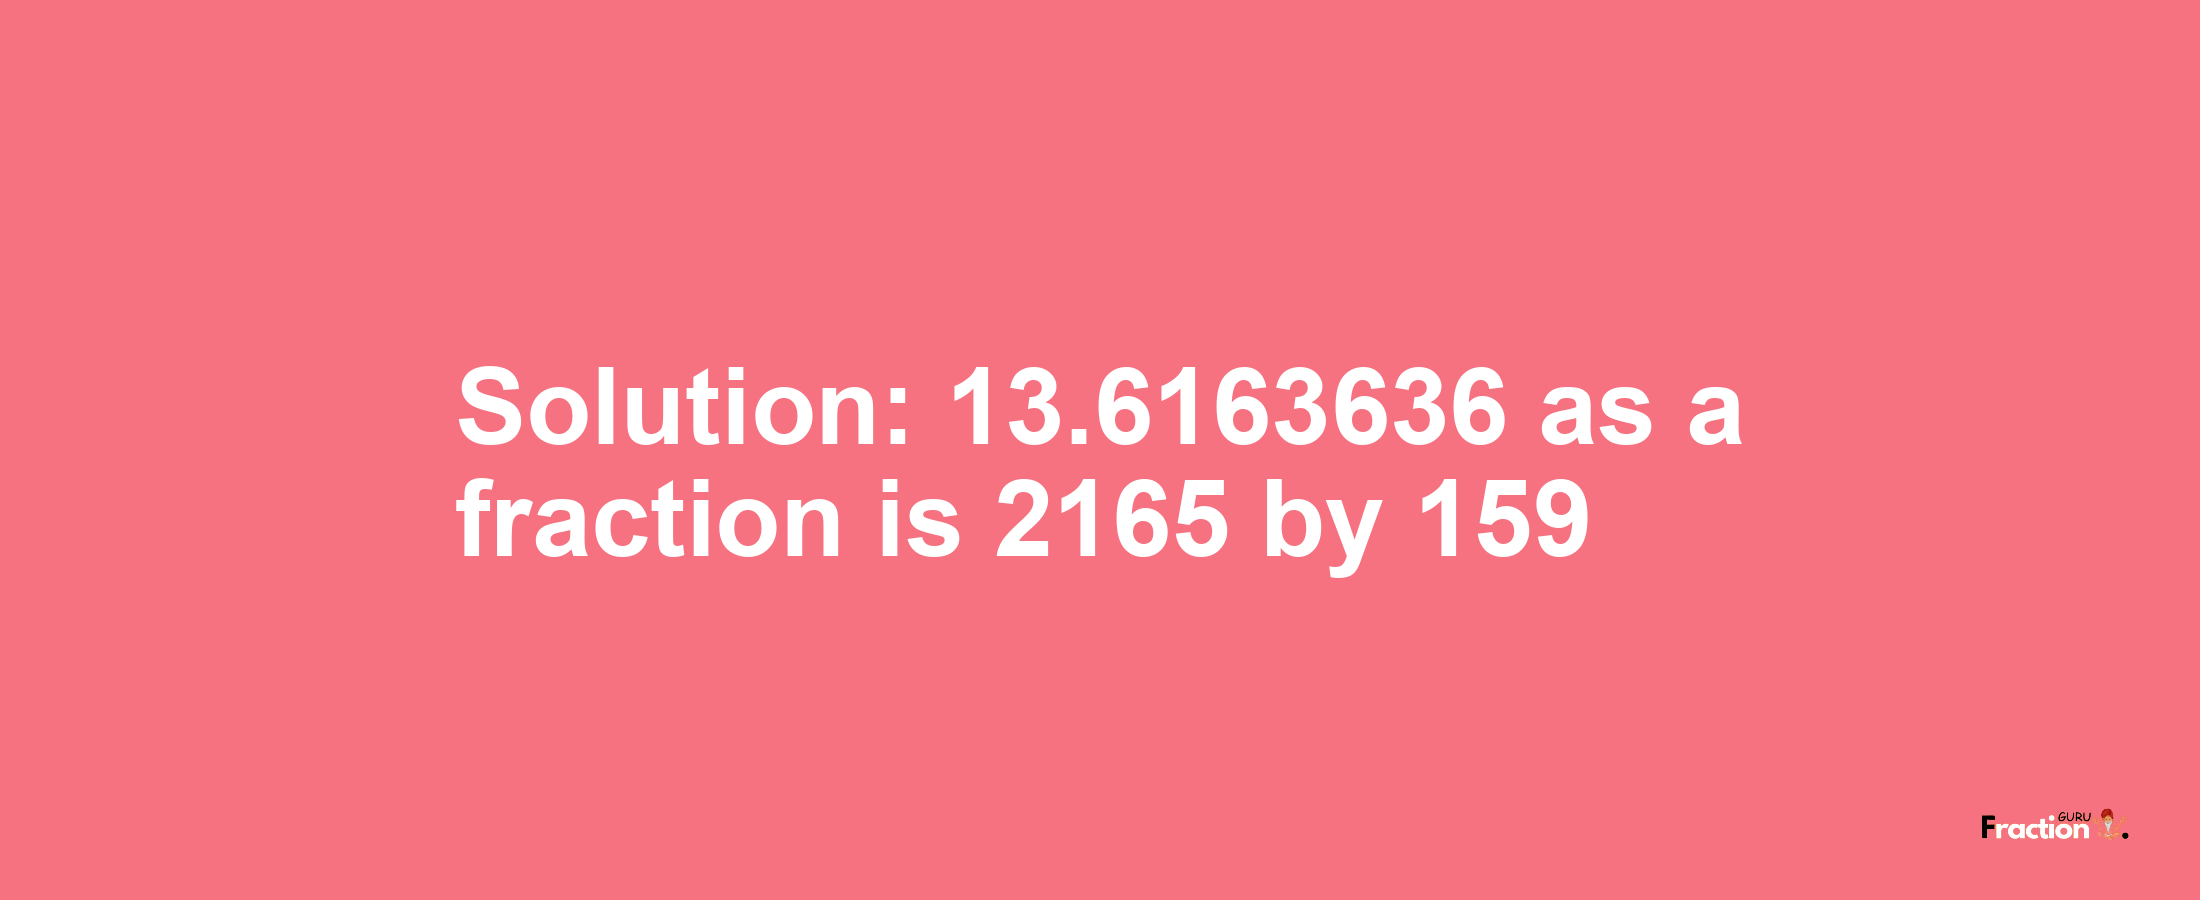 Solution:13.6163636 as a fraction is 2165/159